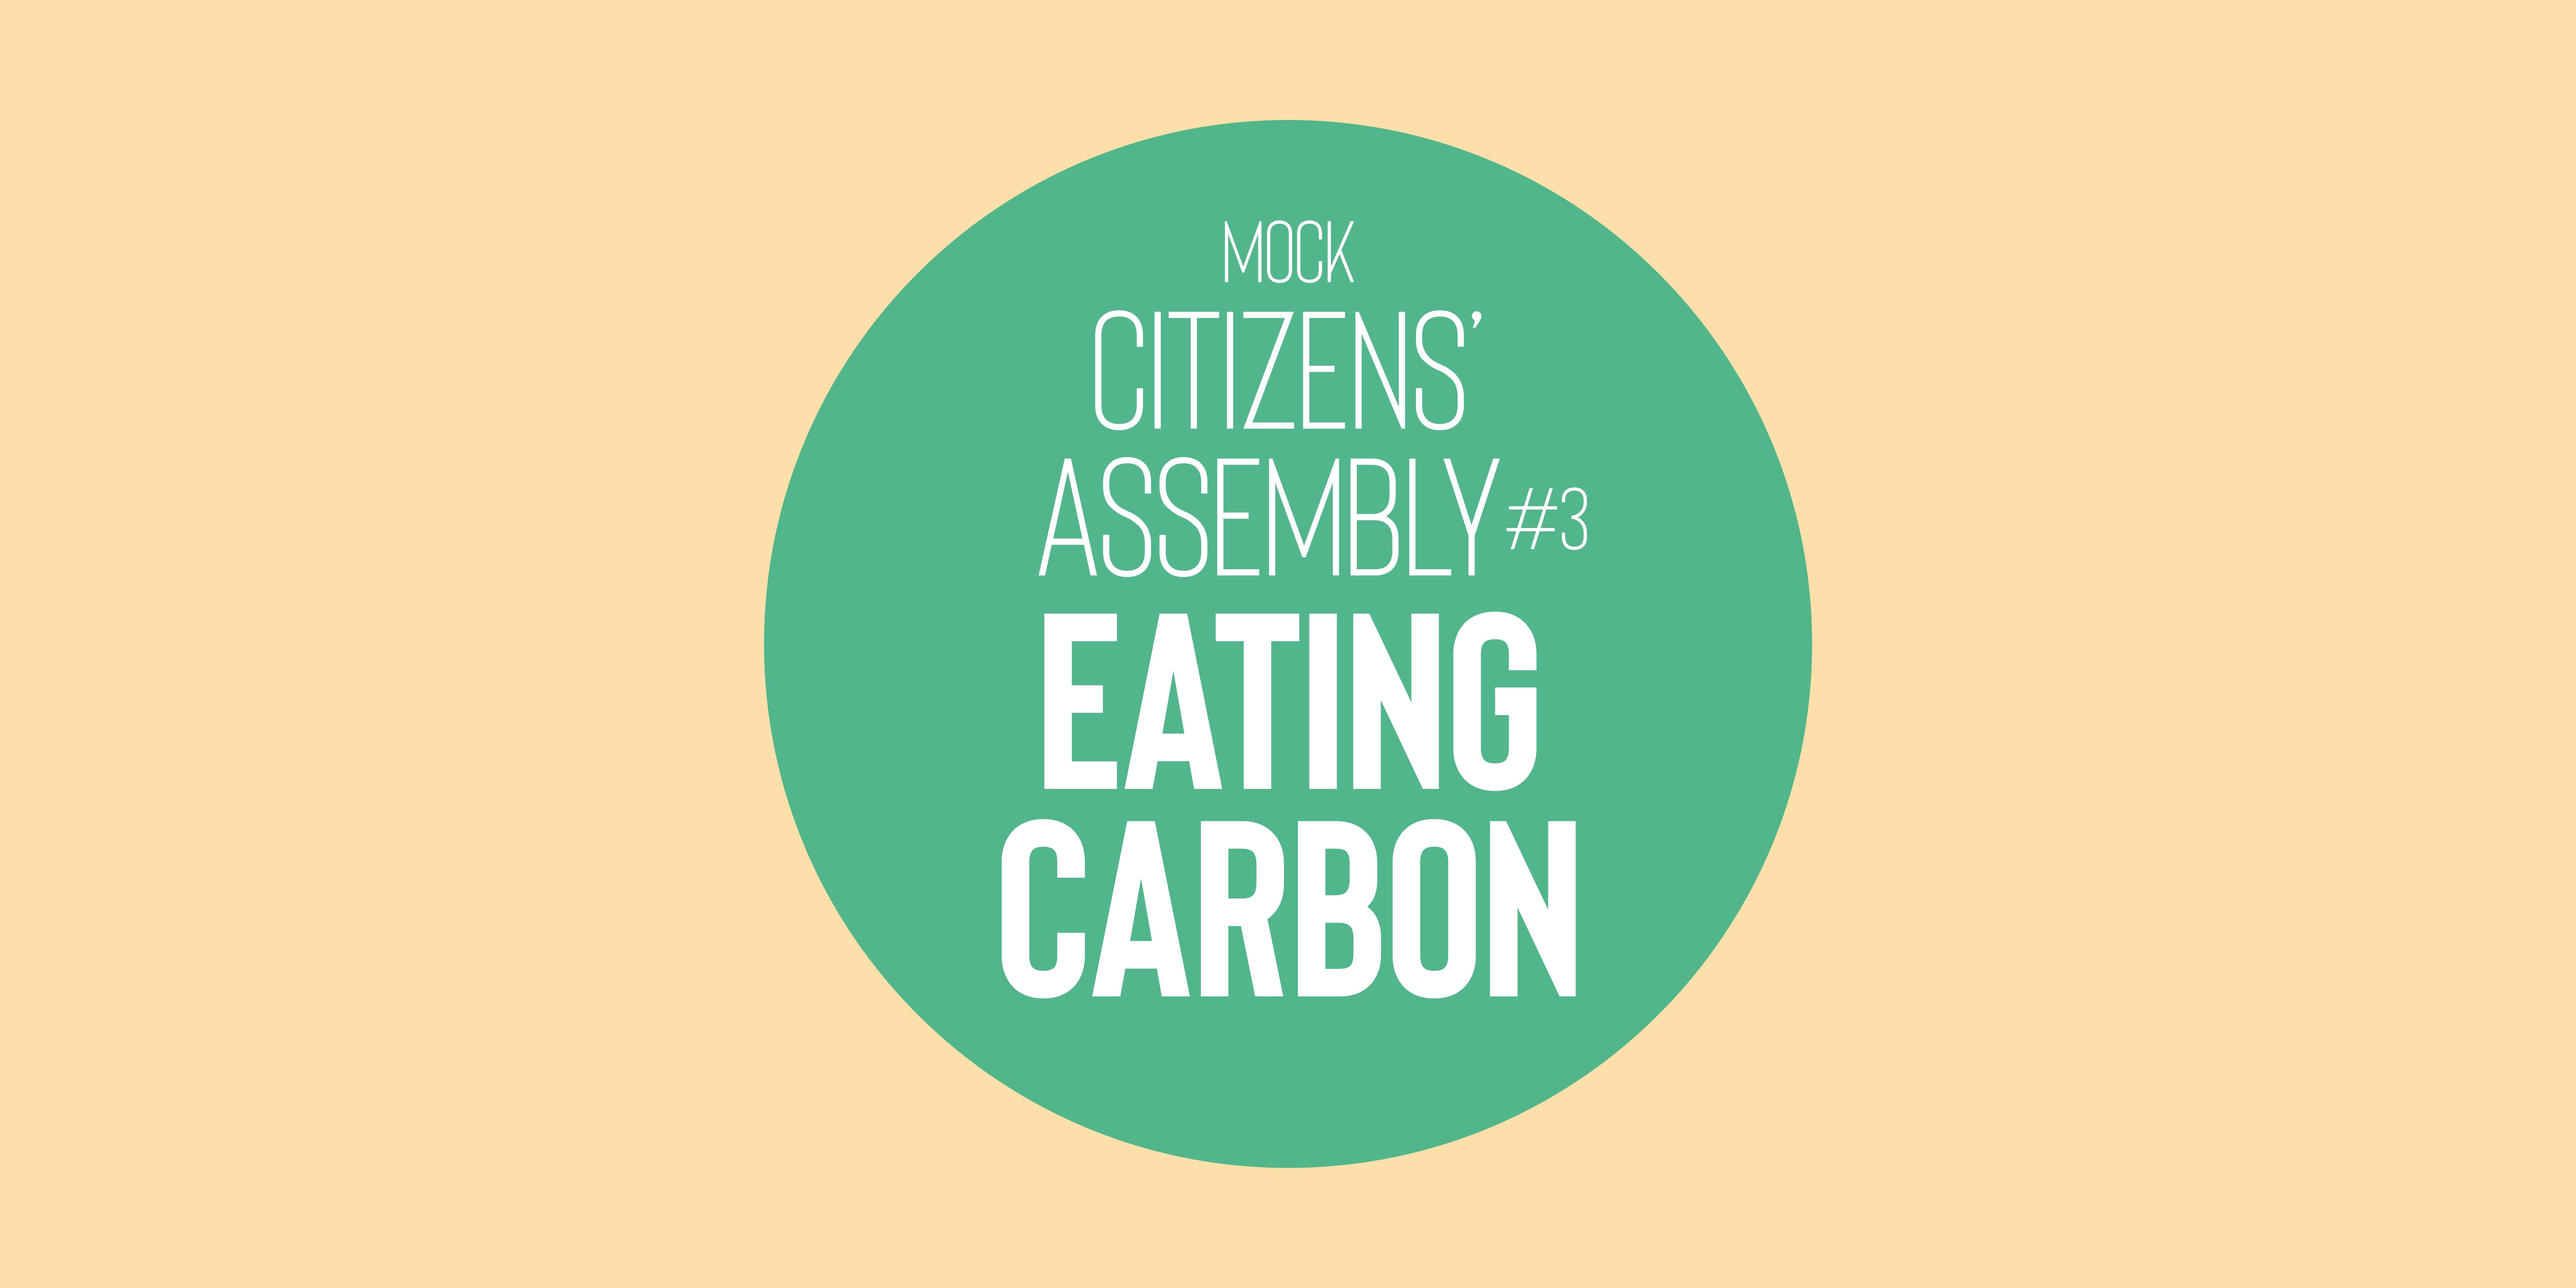 Eating carbon: Regenerative agriculture in the climate crisis